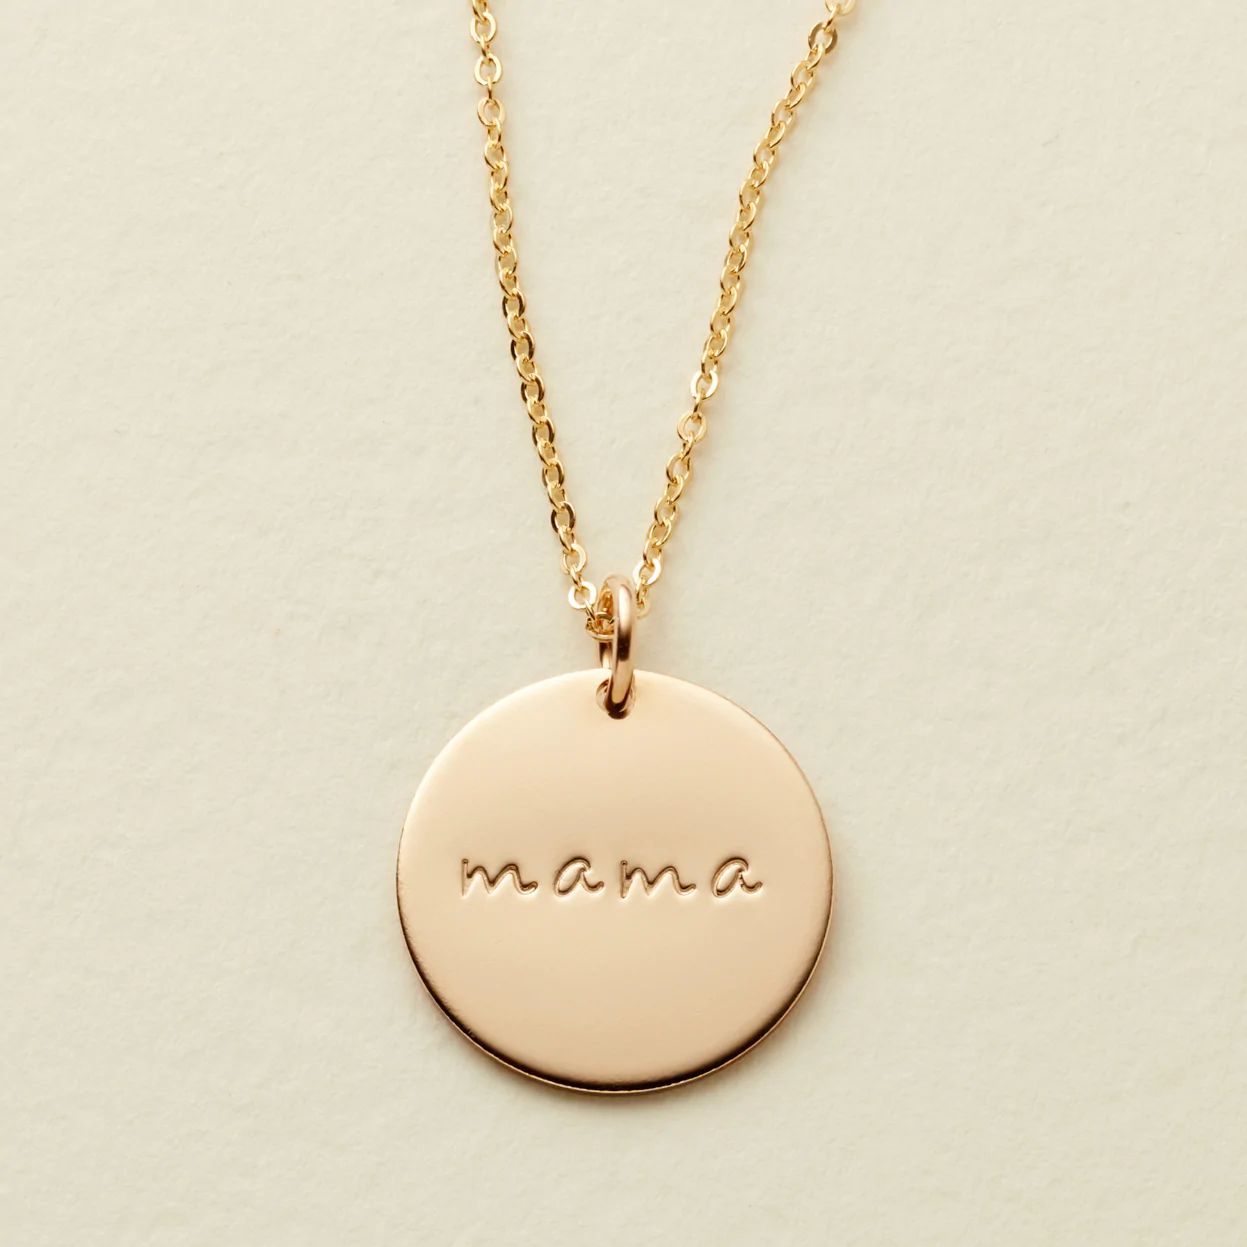 Mama Disc Necklace - 5/8" | Made by Mary (US)